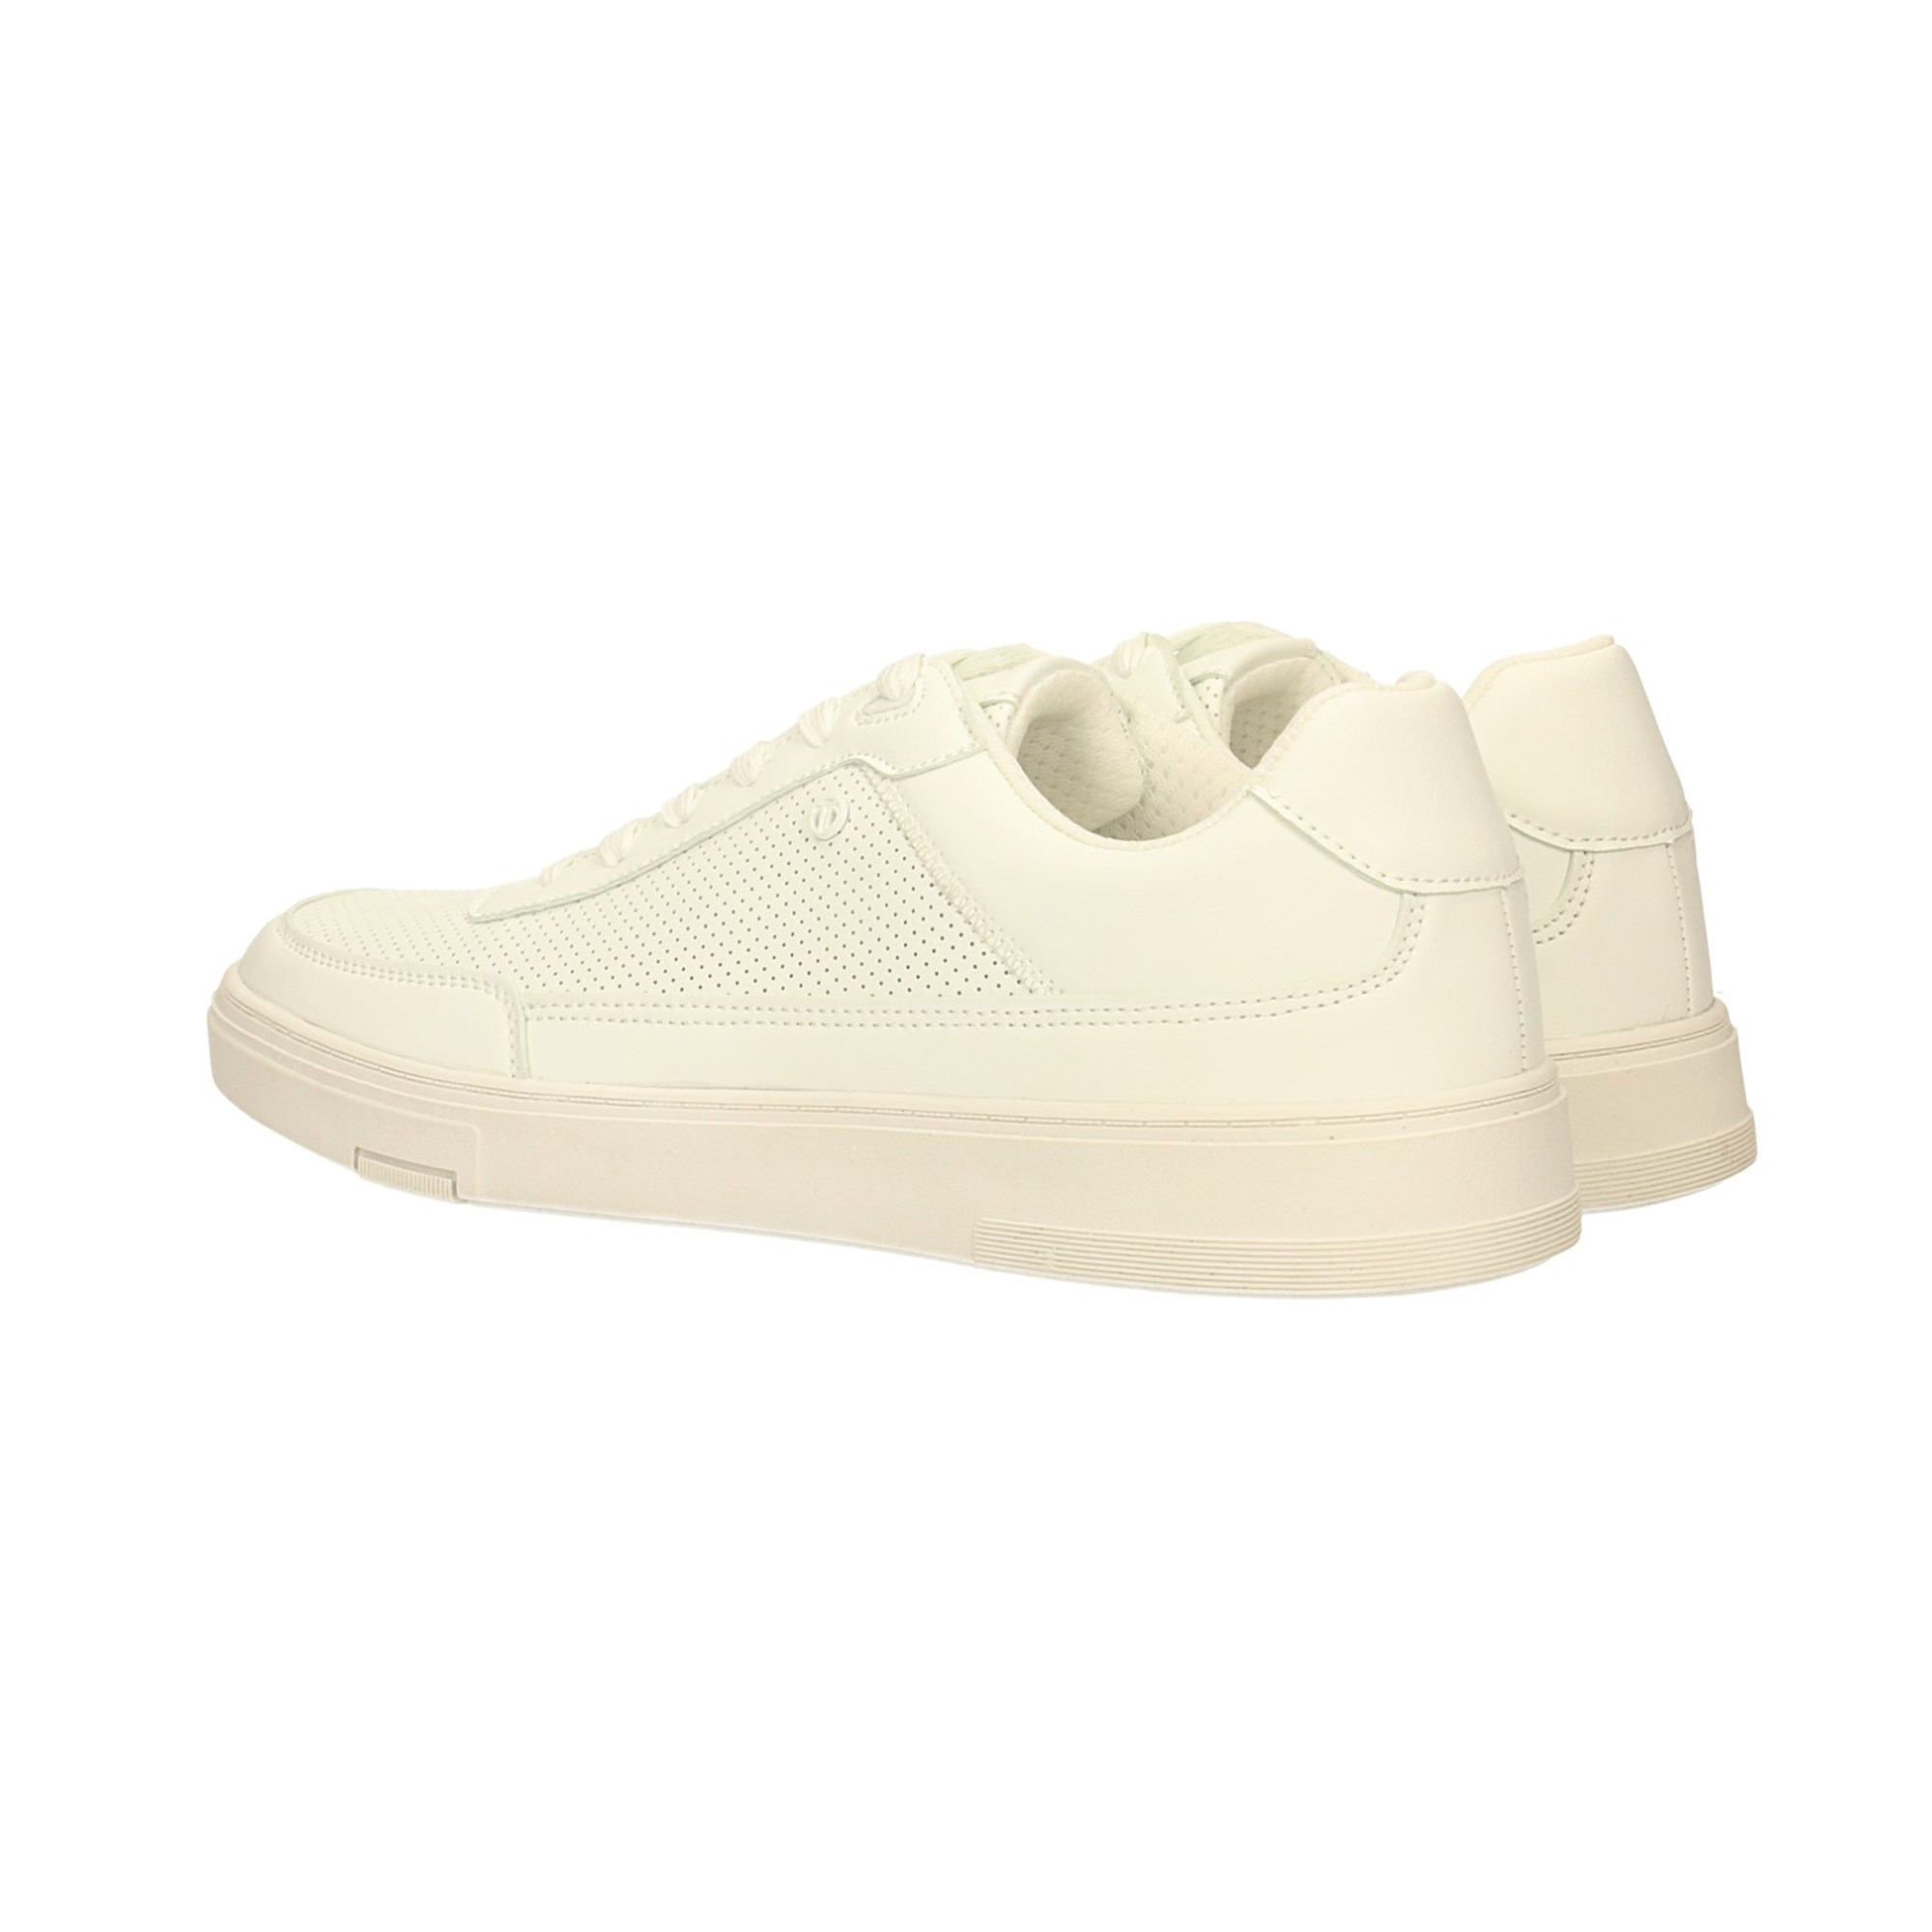 Outlet Online Shop Sneakers bianche basse